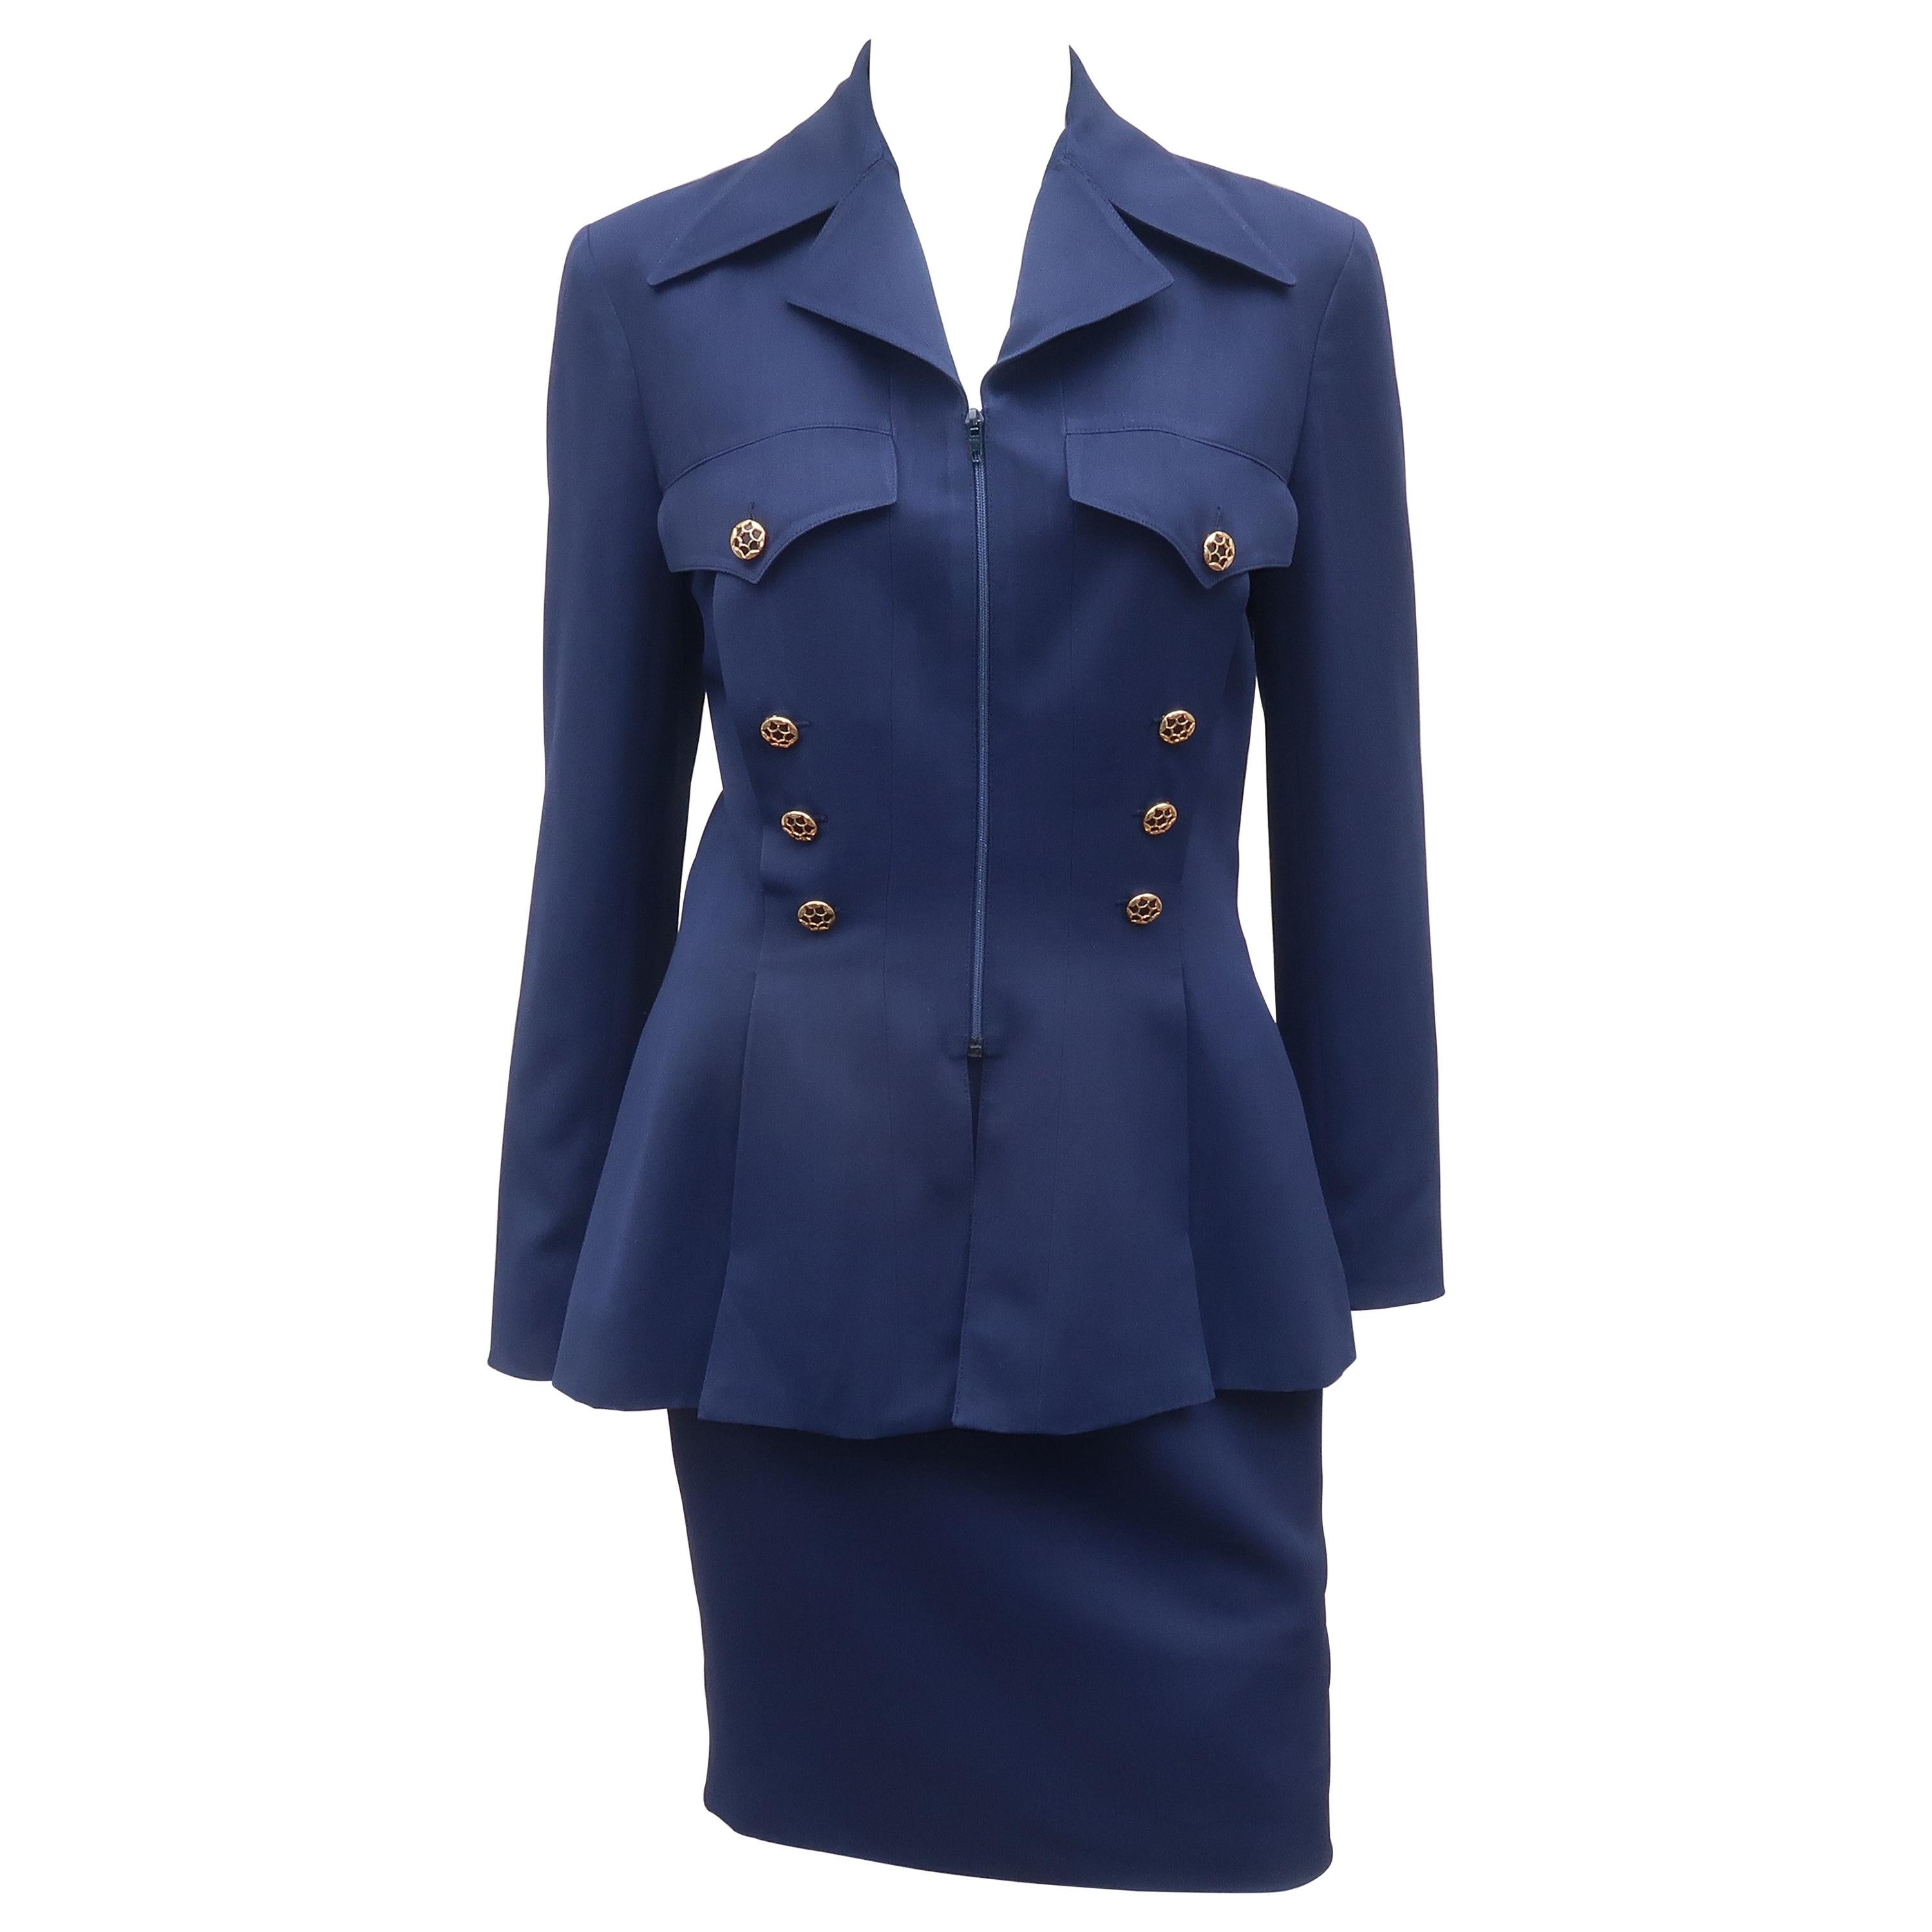 Karl Lagerfeld Navy Blue Skirt Suit With Gold Buttons